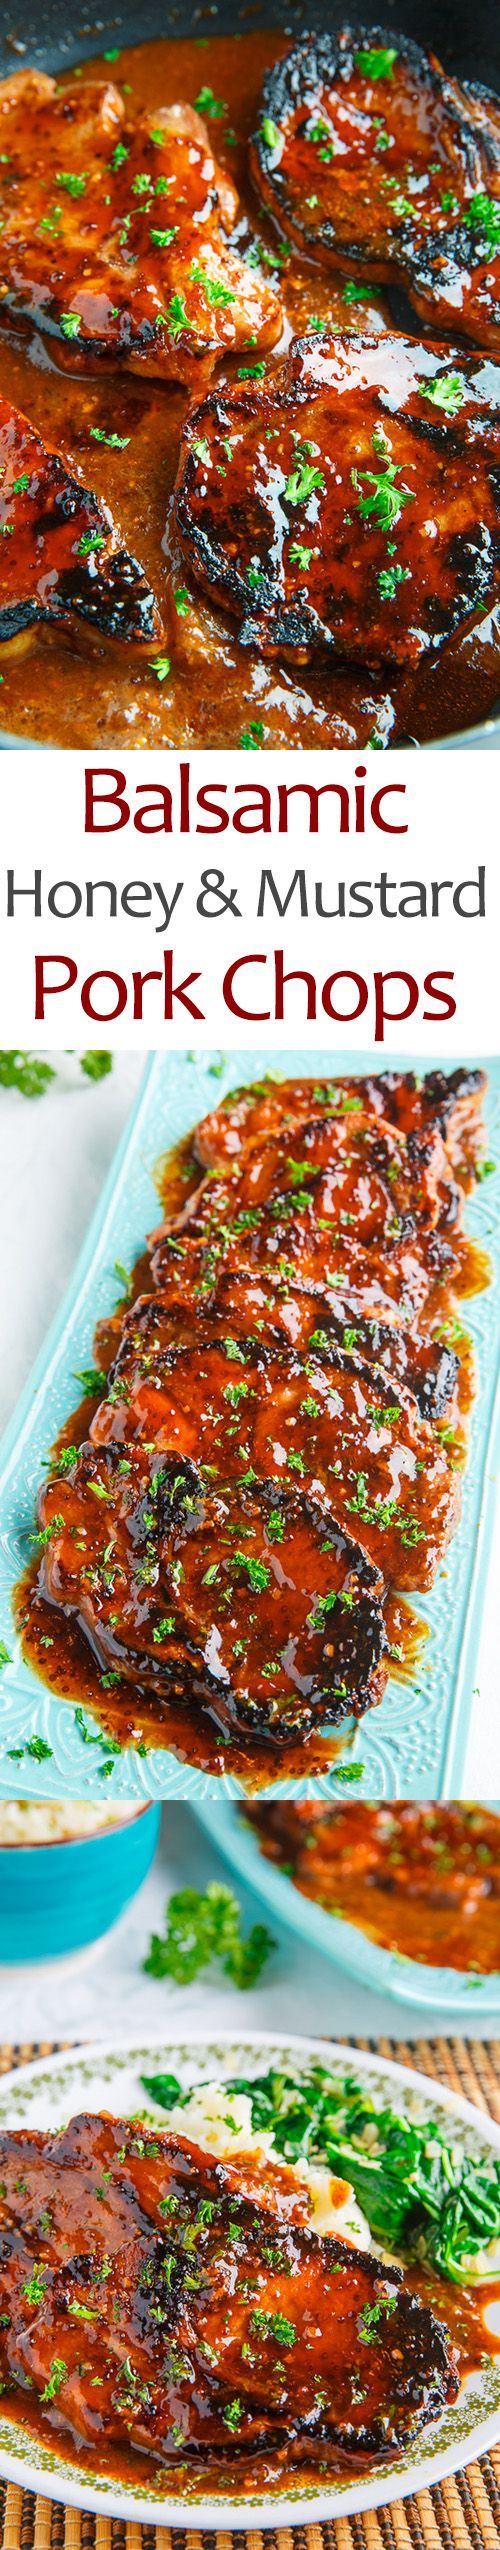 Balsamic Honey and Mustard Pork Chops- from Kevins Closet Cooking – mix it up alil! THANKS